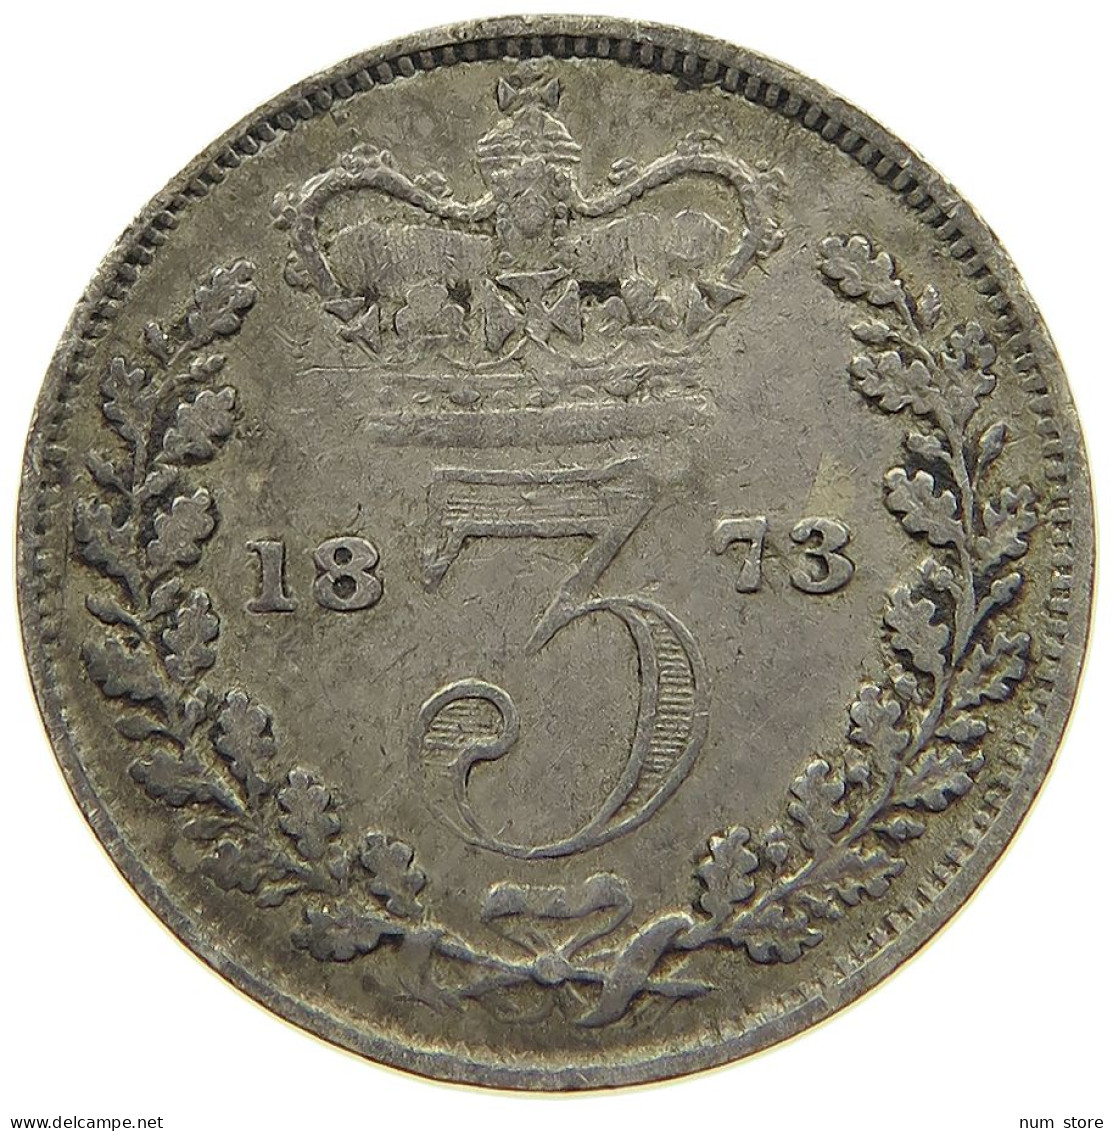 GREAT BRITAIN THREEPENCE 1873 Victoria 1837-1901 #t006 0245 - F. 3 Pence